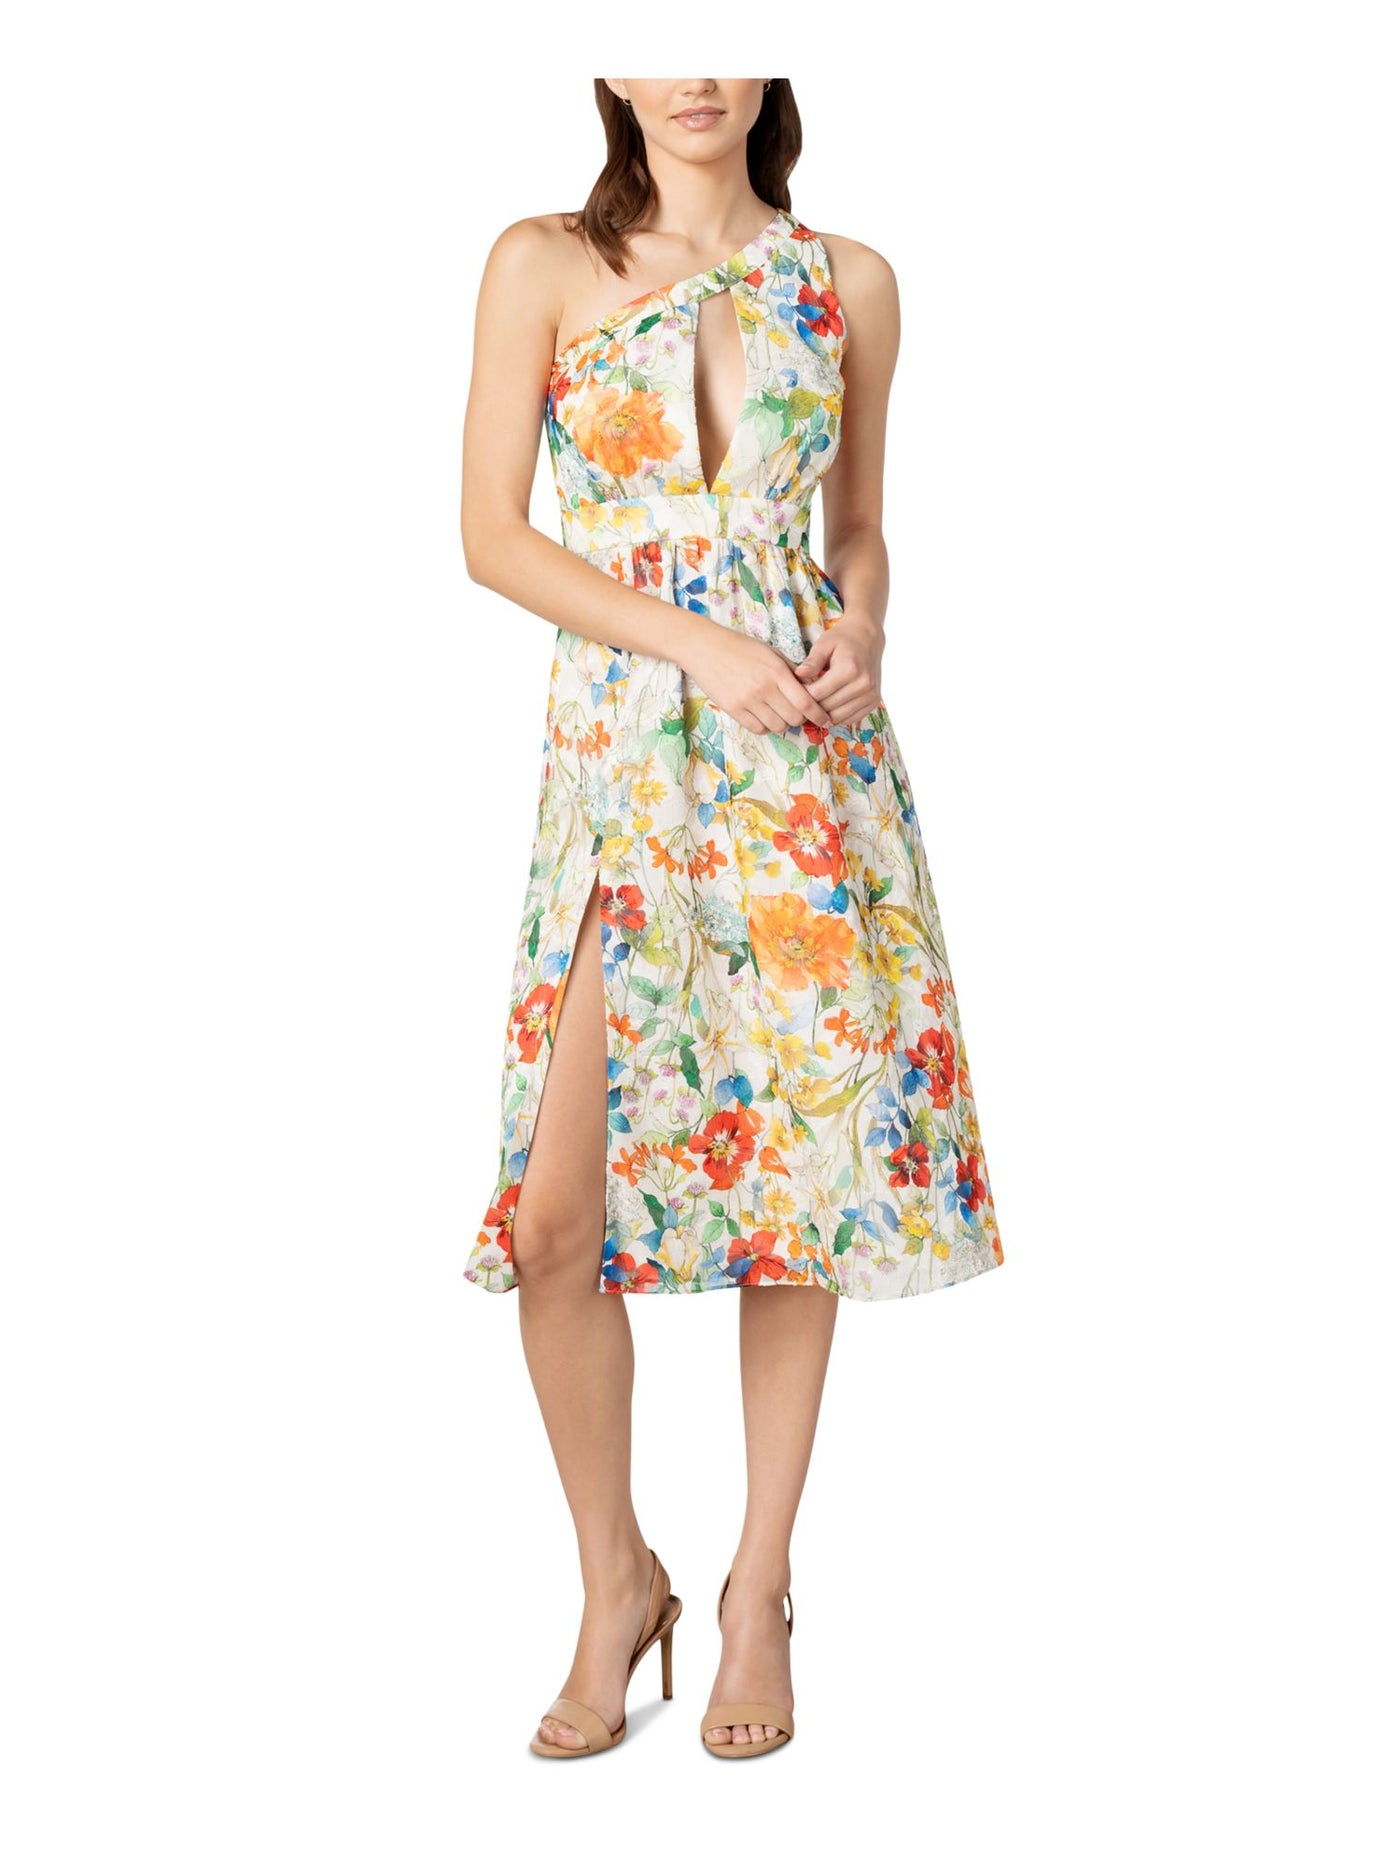 DRESS THE POPULATION Womens White Cut Out Pocketed Lined Slit Boning Zippered Floral Sleeveless Asymmetrical Neckline Below The Knee Fit + Flare Dress XXS